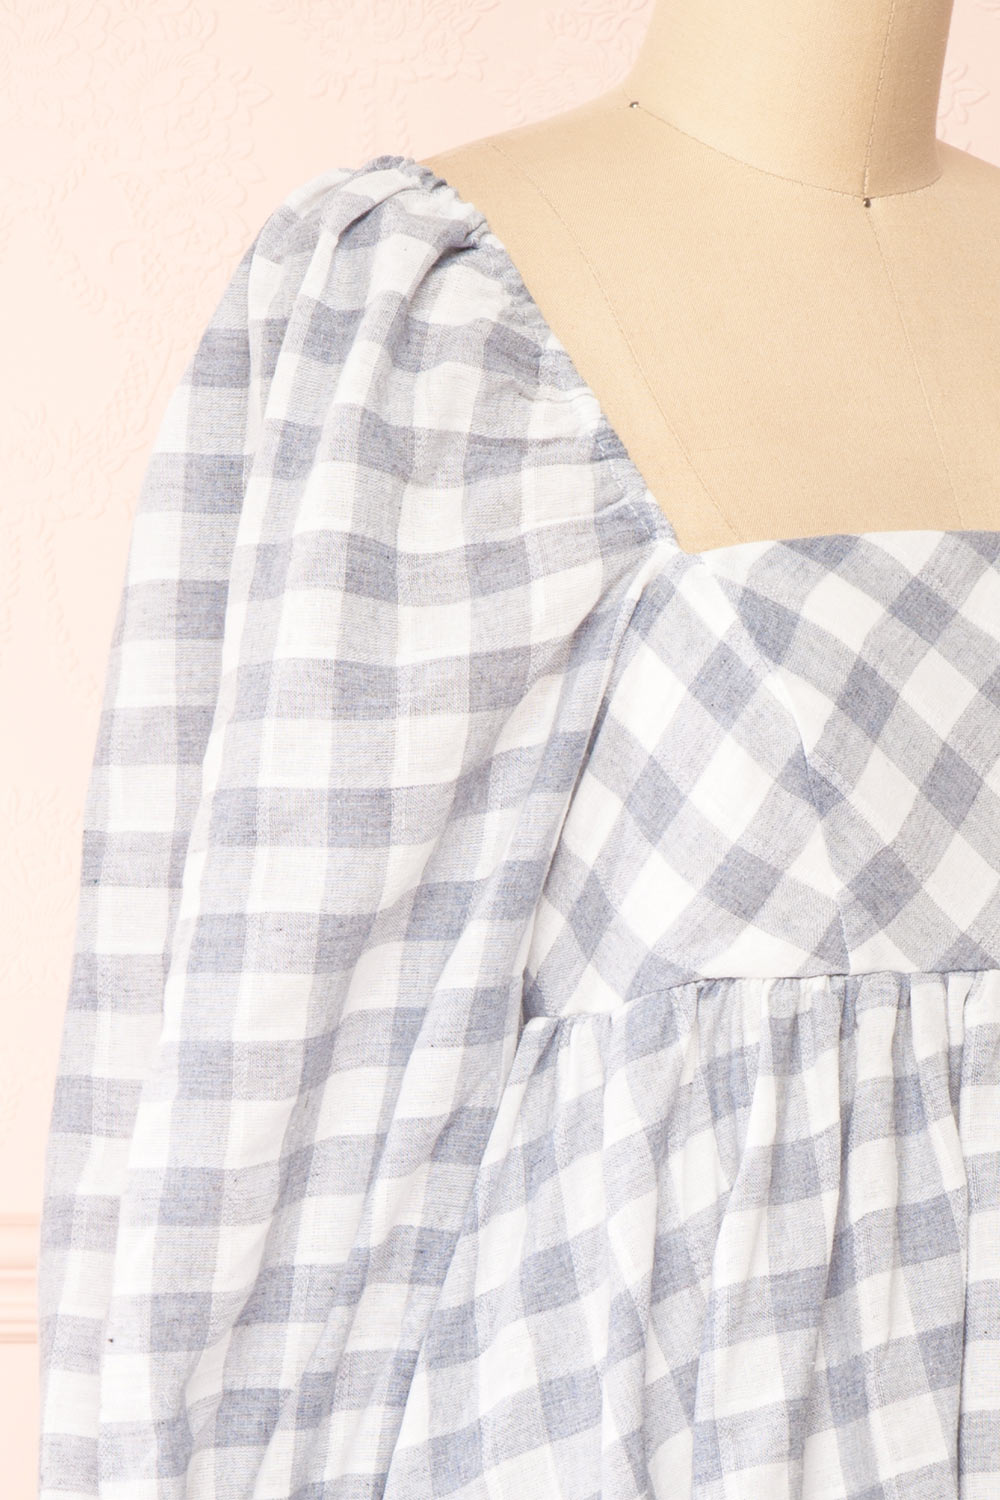 Conie Blue | Puffed Sleeves Short Checkered Dress side close-up